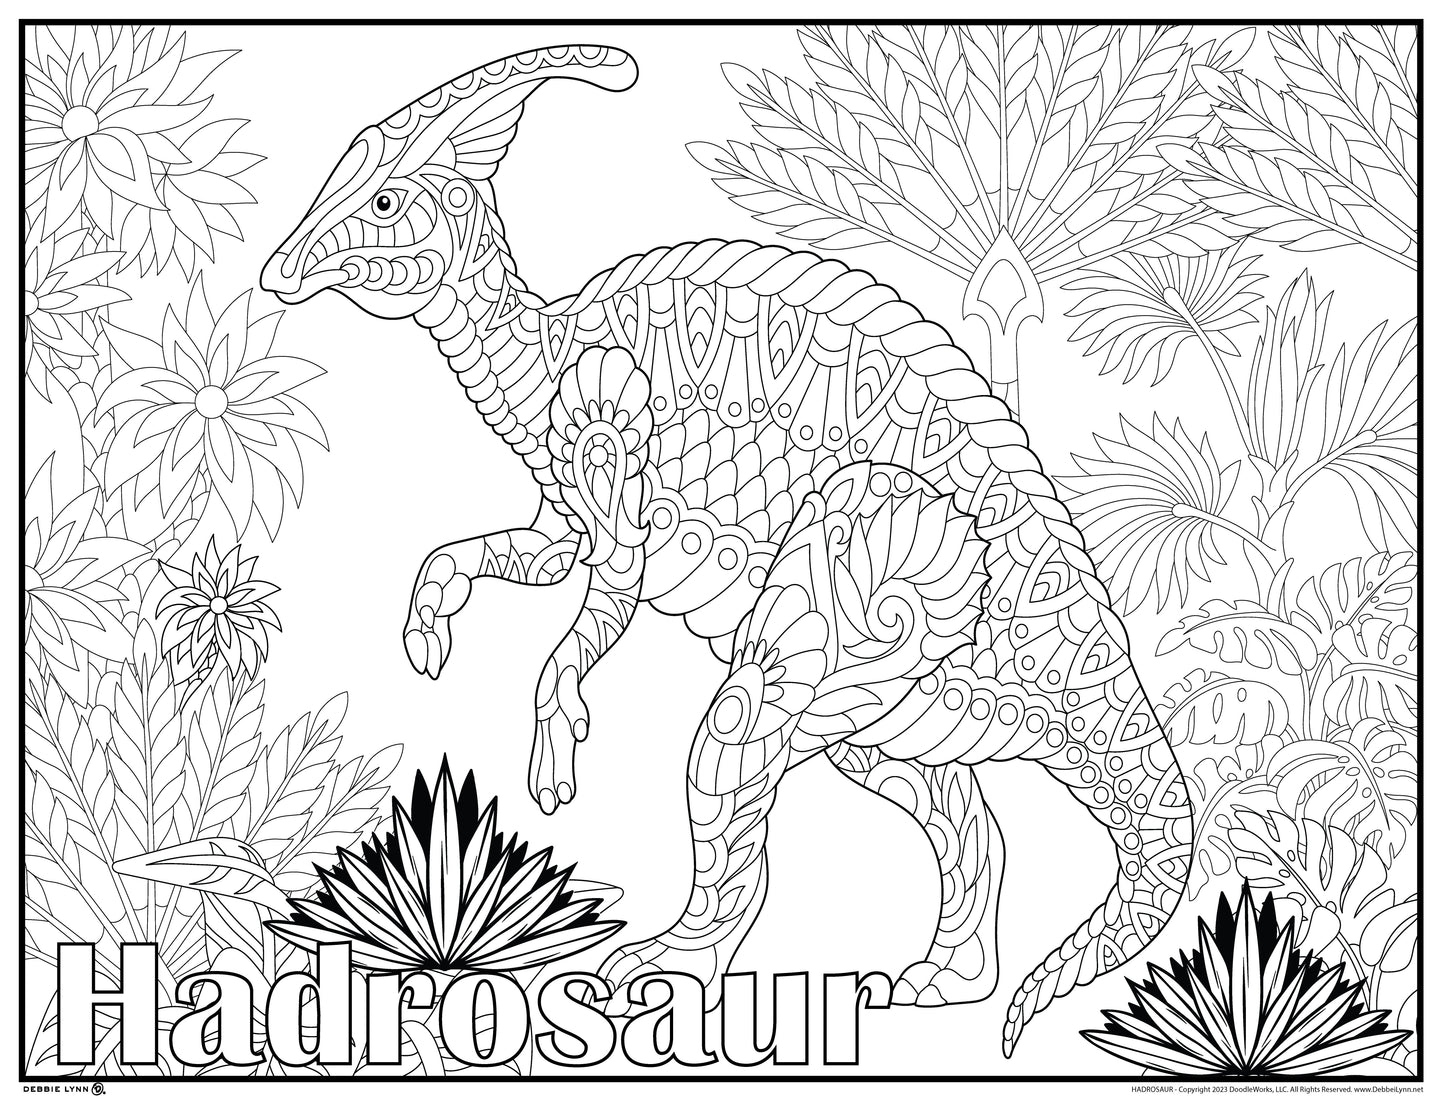 Hadrosaur Dinosaur Personalized Giant Coloring Poster